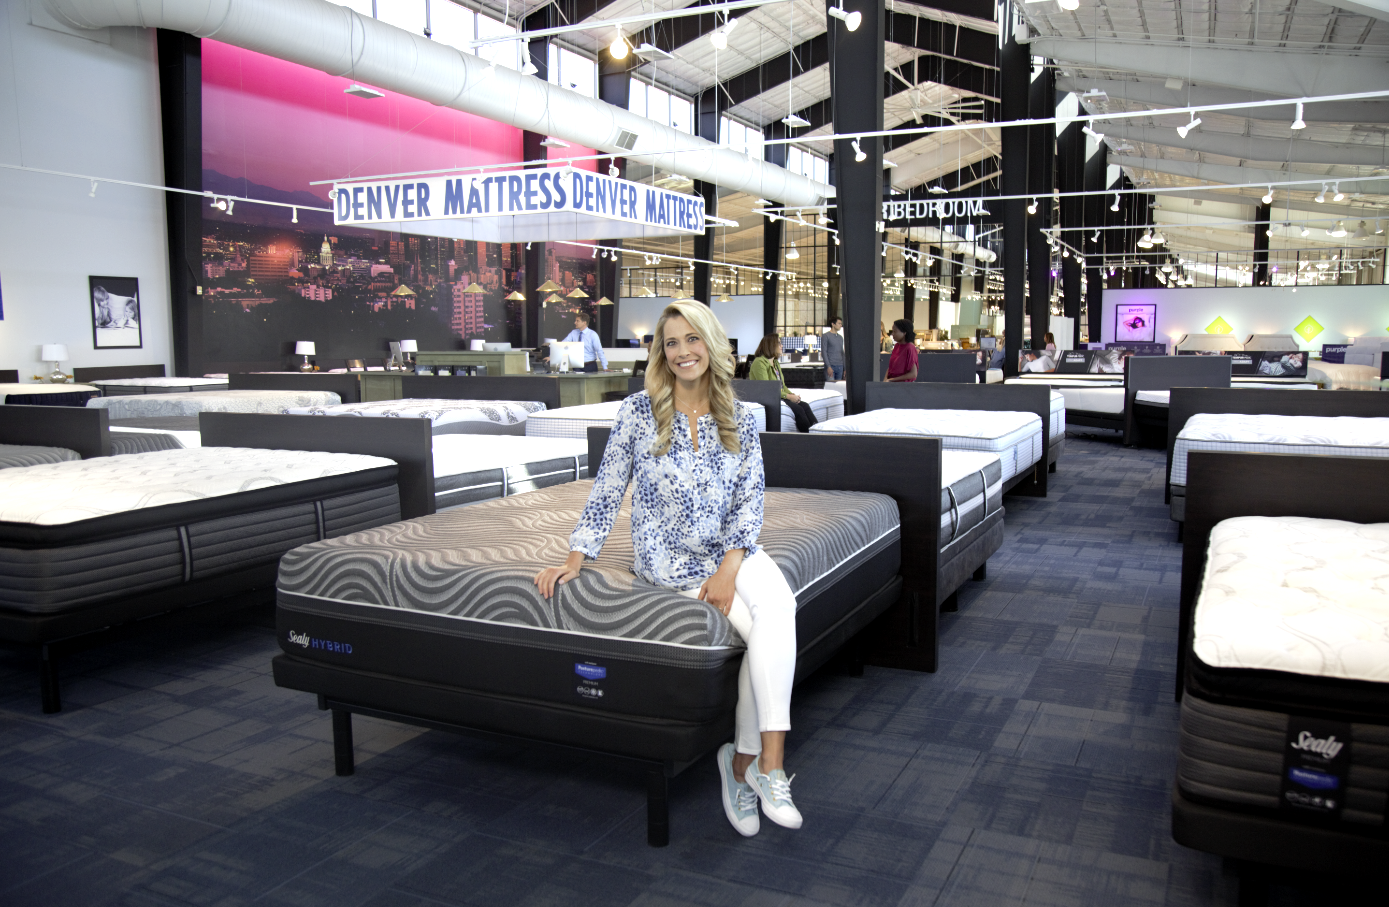 Denver Mattress - Factory Direct and Brand Name Mattresses. Huge mattress savings! Denver Mattress Tyler (903)526-0367